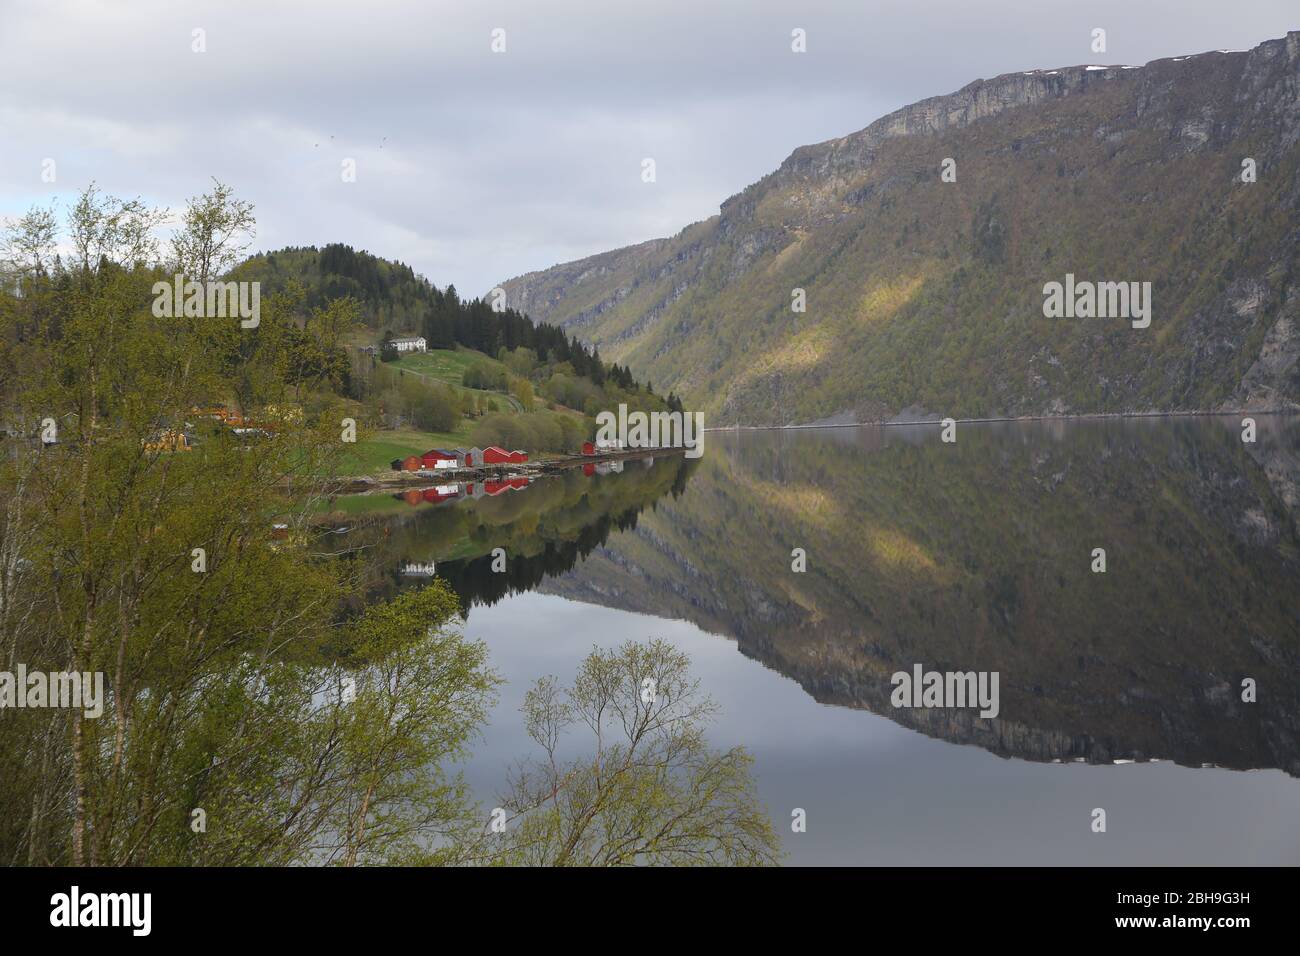 Village reflected perfectly in water Stock Photo